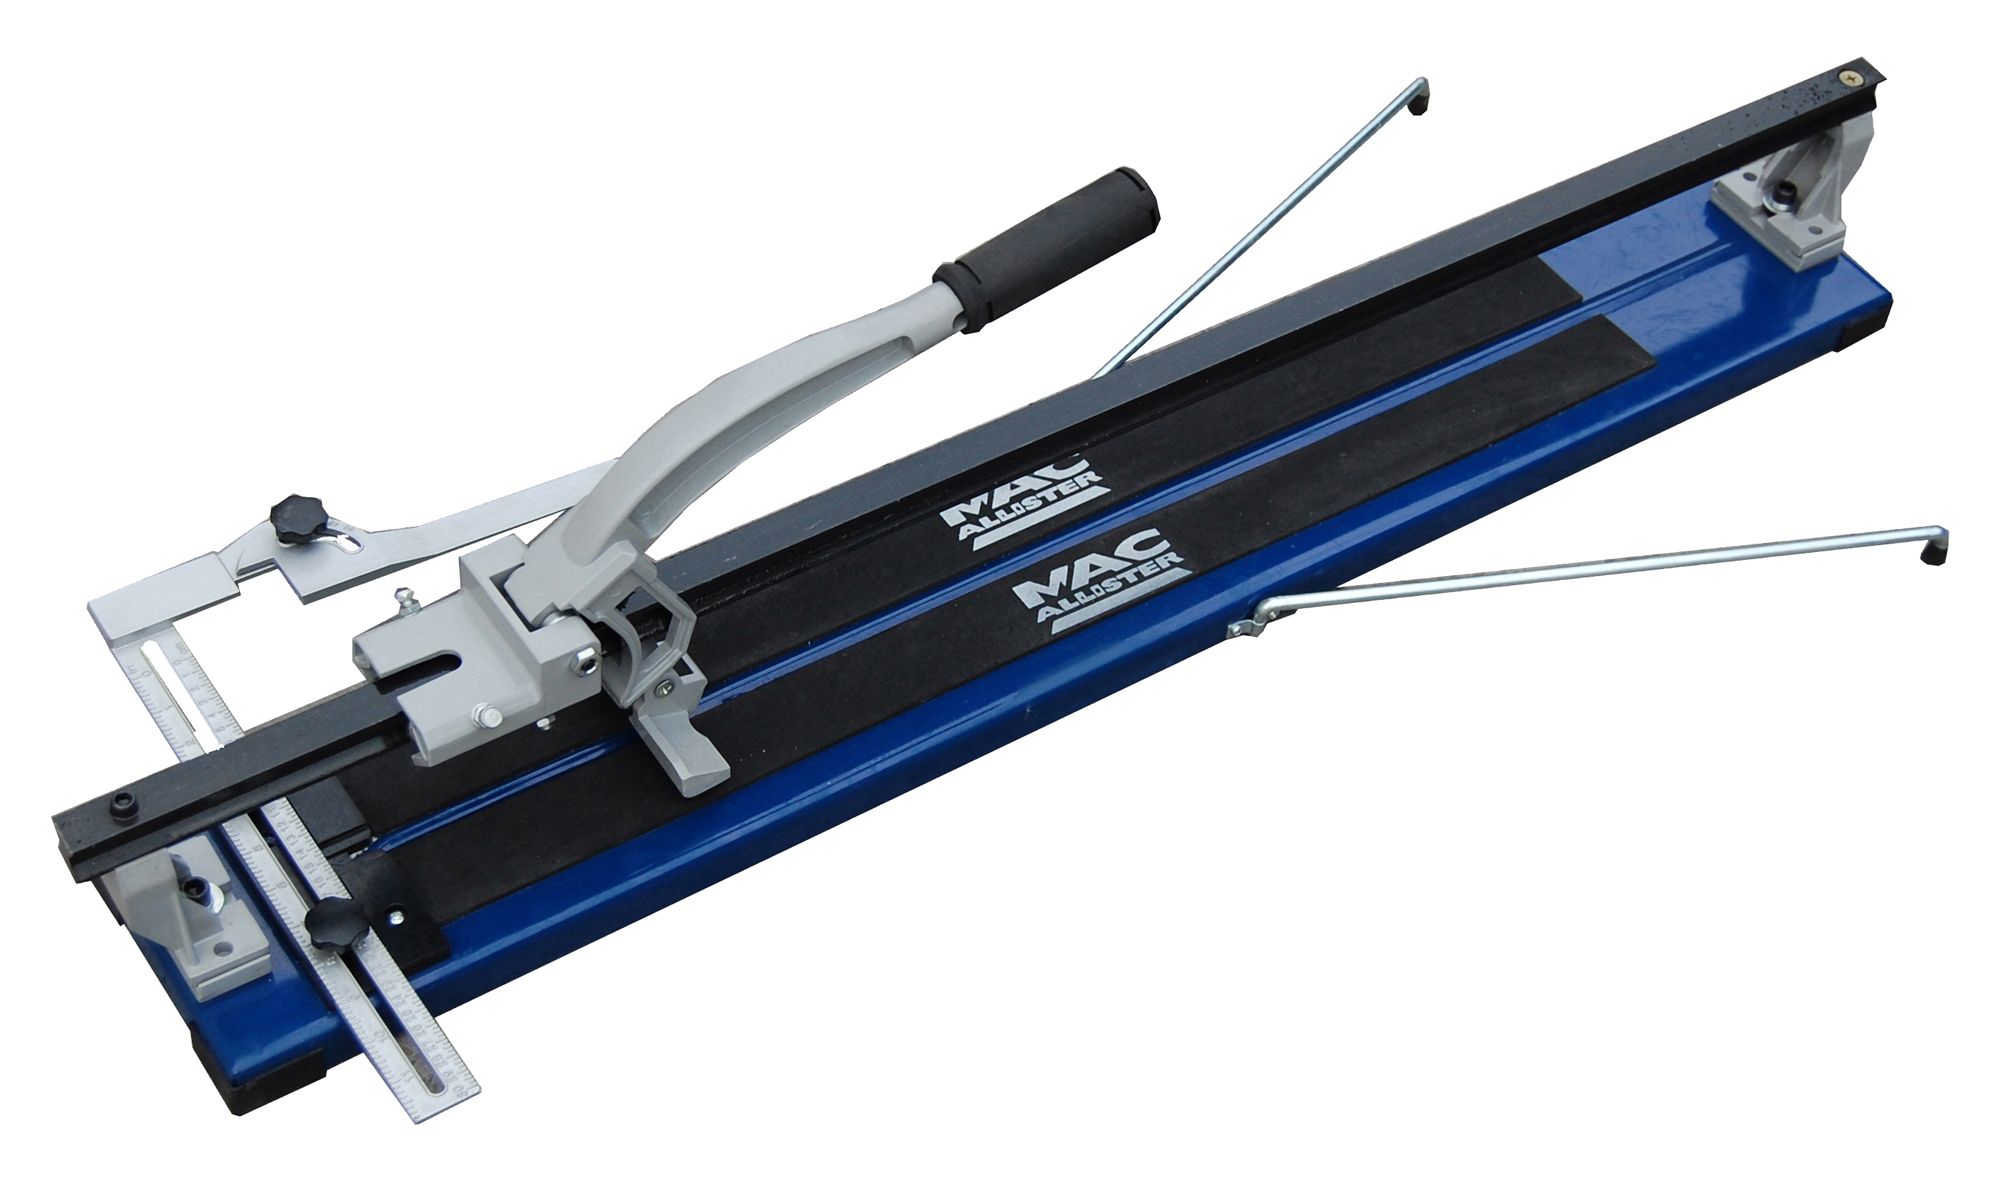 Top ranking of the best tile cutters in 2019